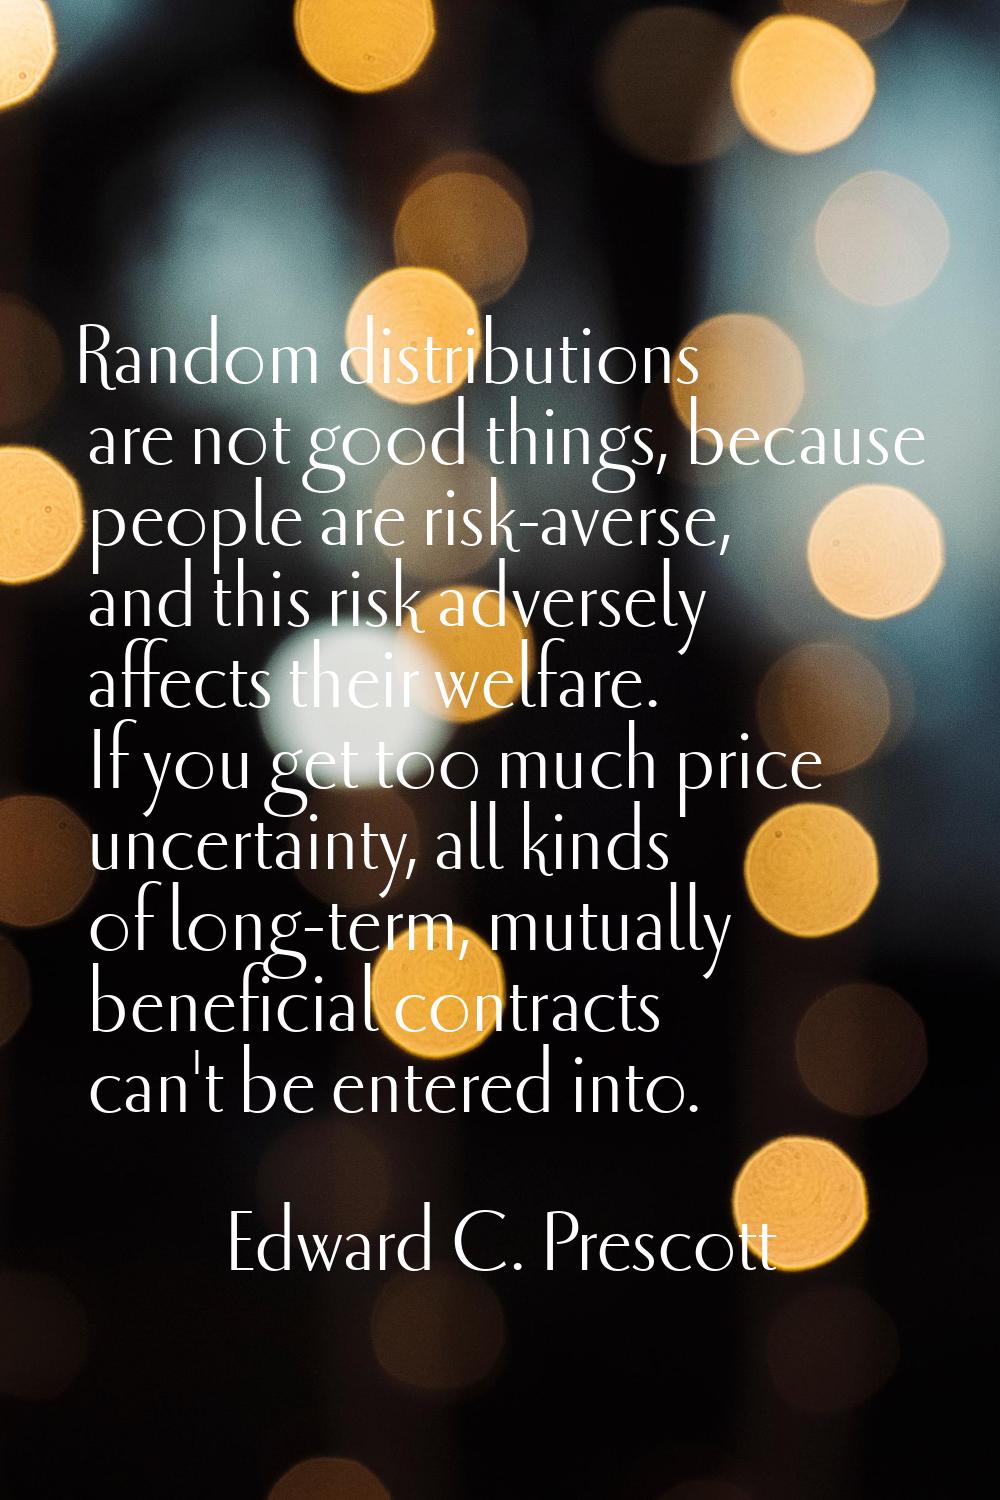 Random distributions are not good things, because people are risk-averse, and this risk adversely a